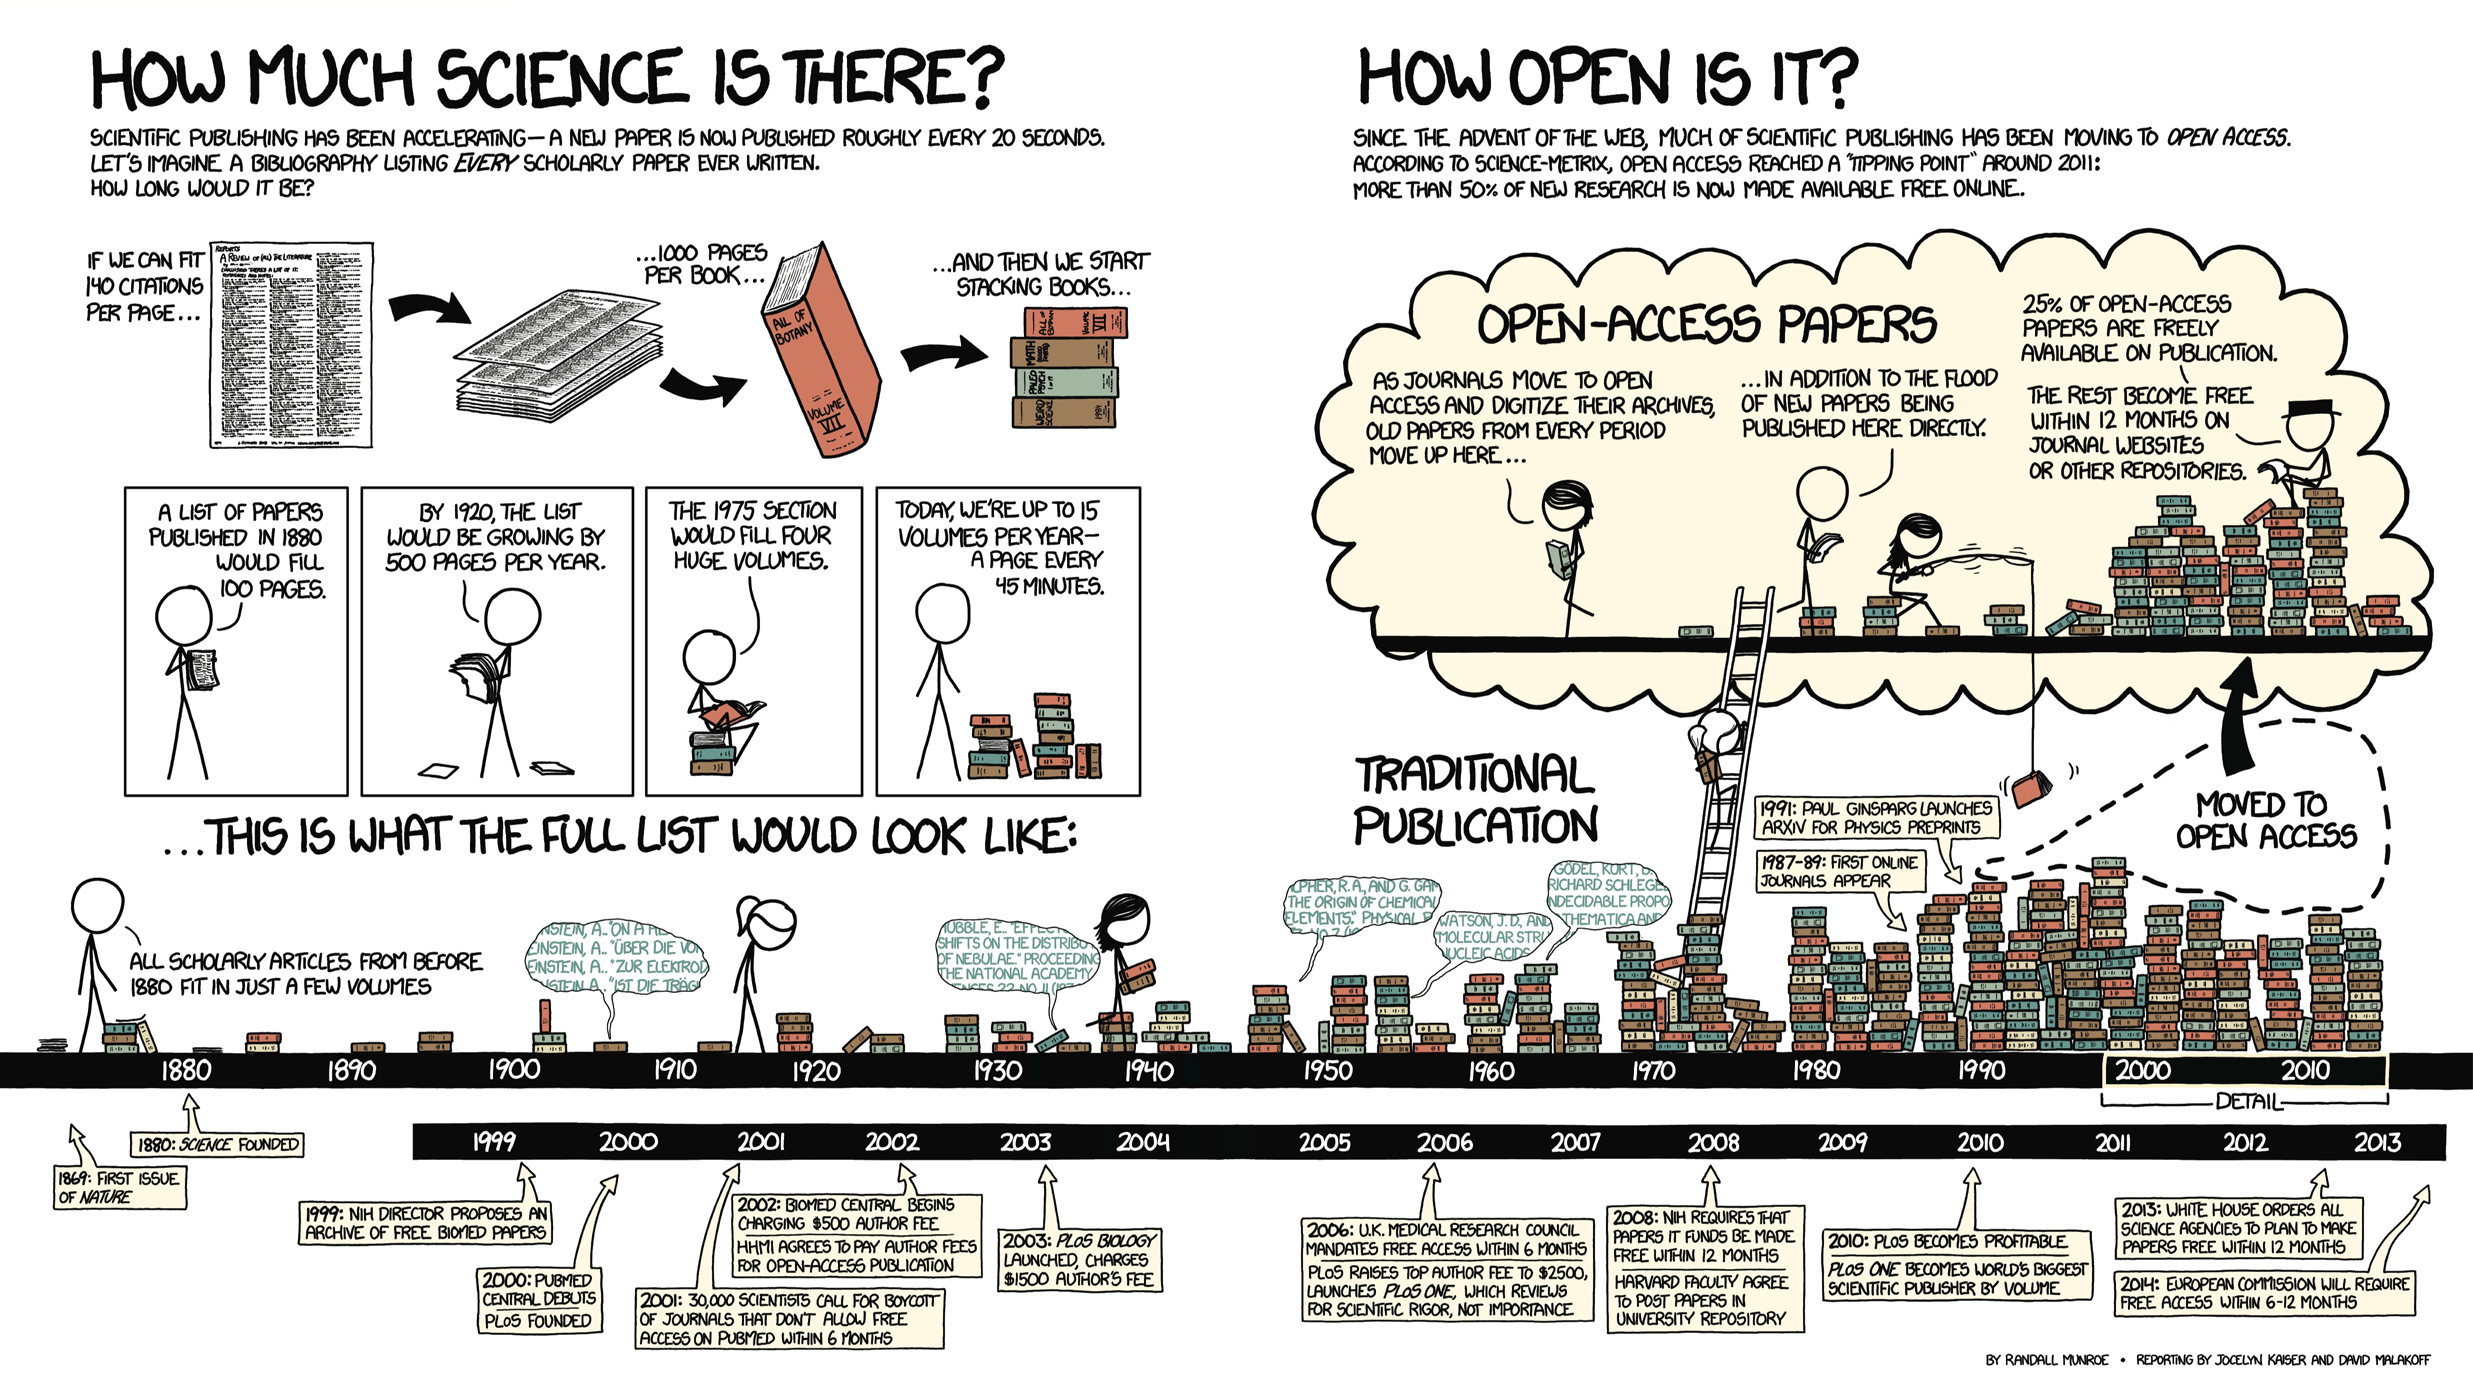 The accelerating pace of scientific publishing and the rise of open access, as depicted by xkcd.com cartoonist Randall Munroe.